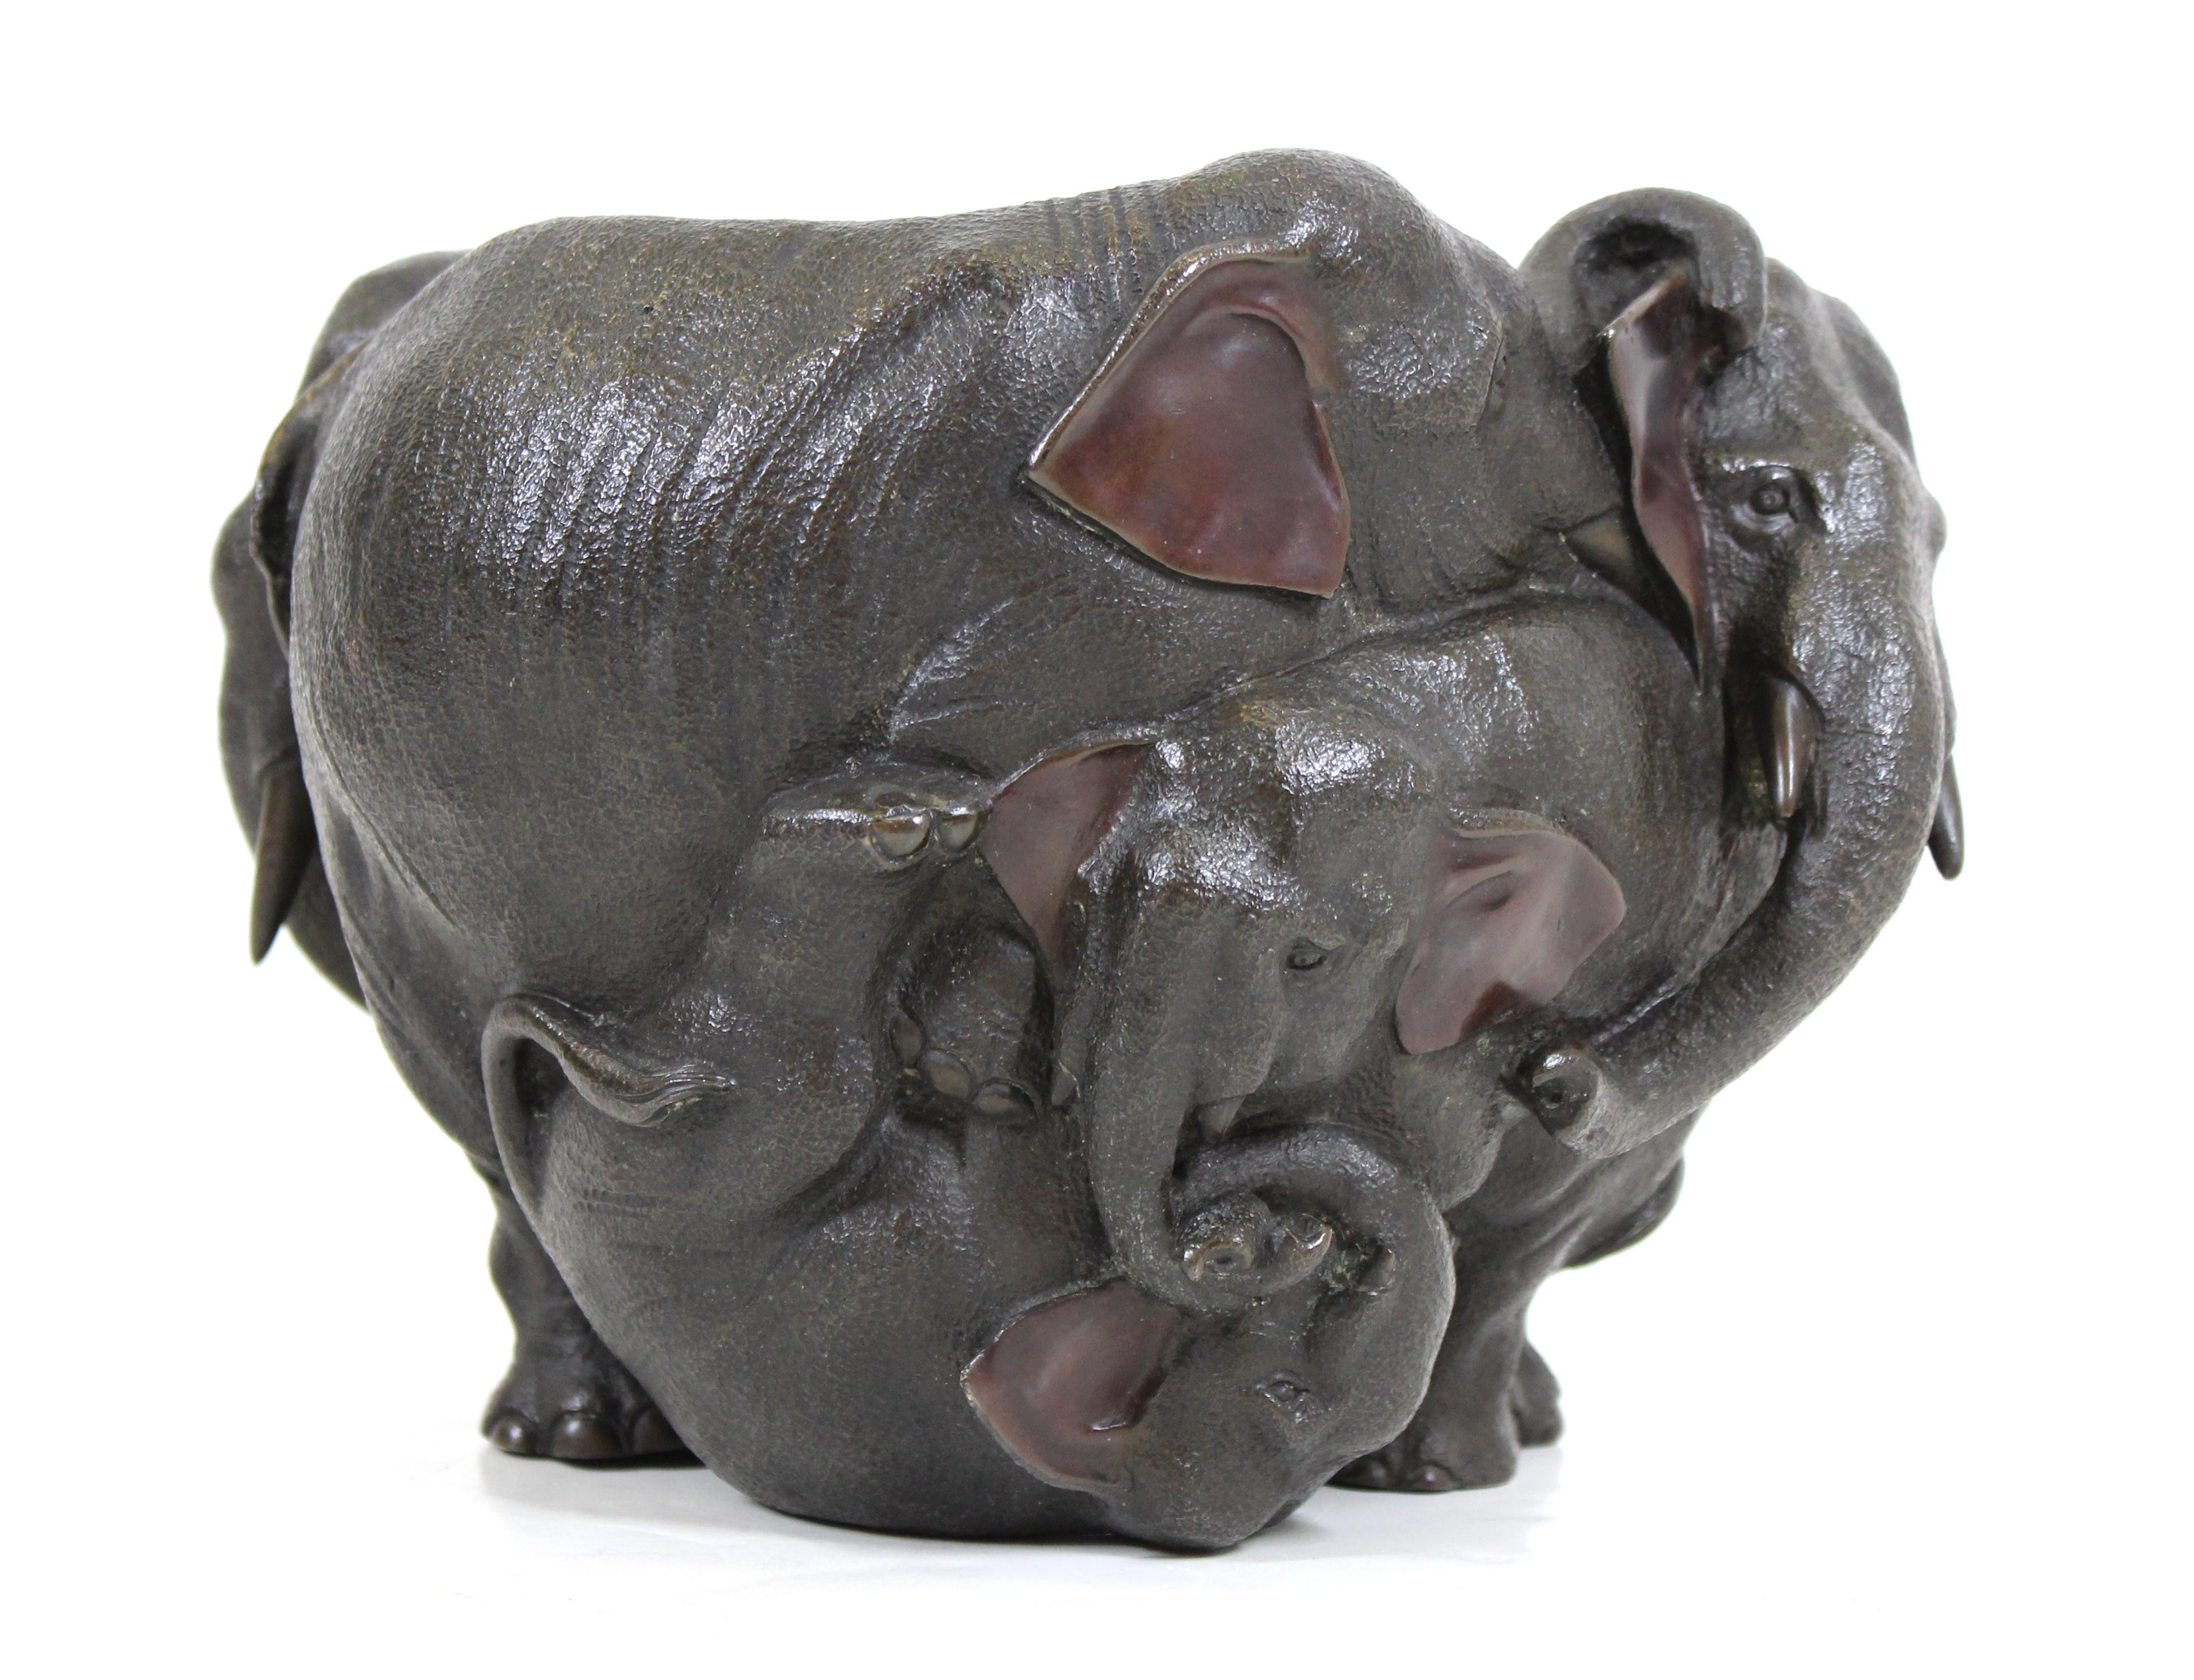 Lucky Asian Two headed elephant planter Antique